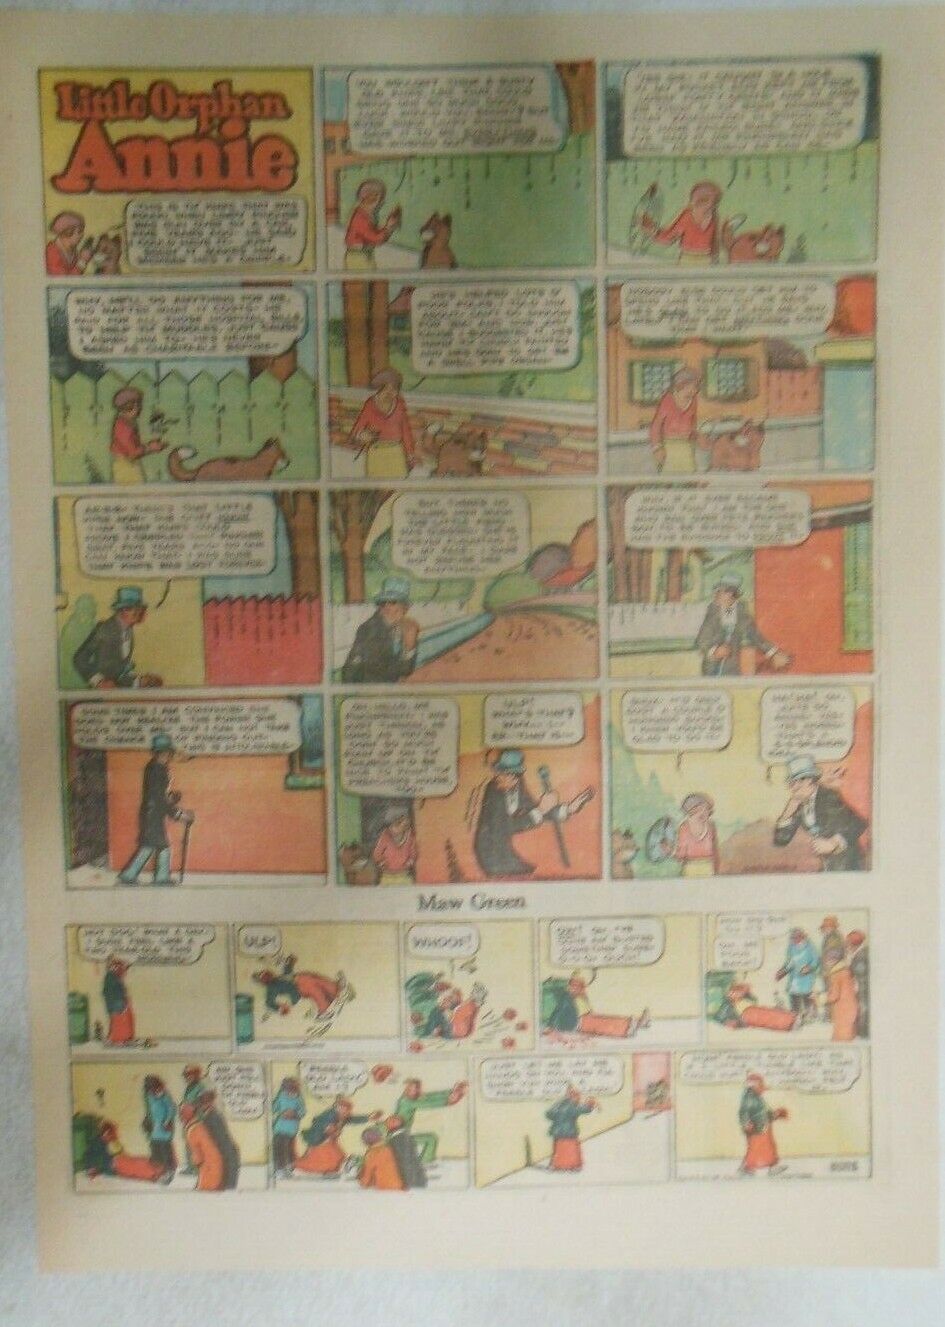 (46) Little Orphan Annie Sundays by Harold Gray from 1933 Tabloid Page Size  